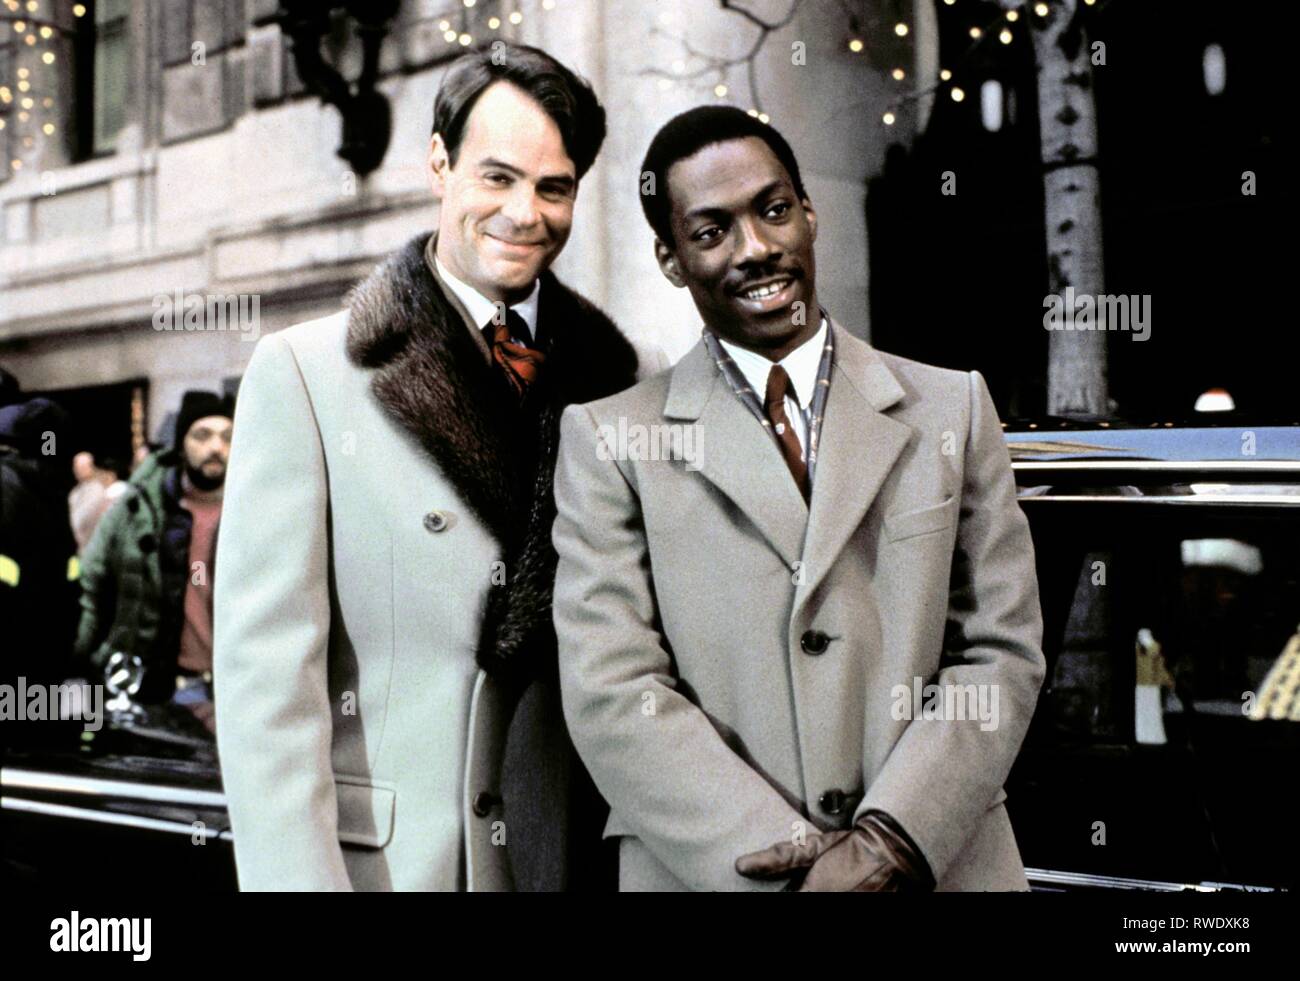 Trading places film hi-res stock photography and images - Alamy